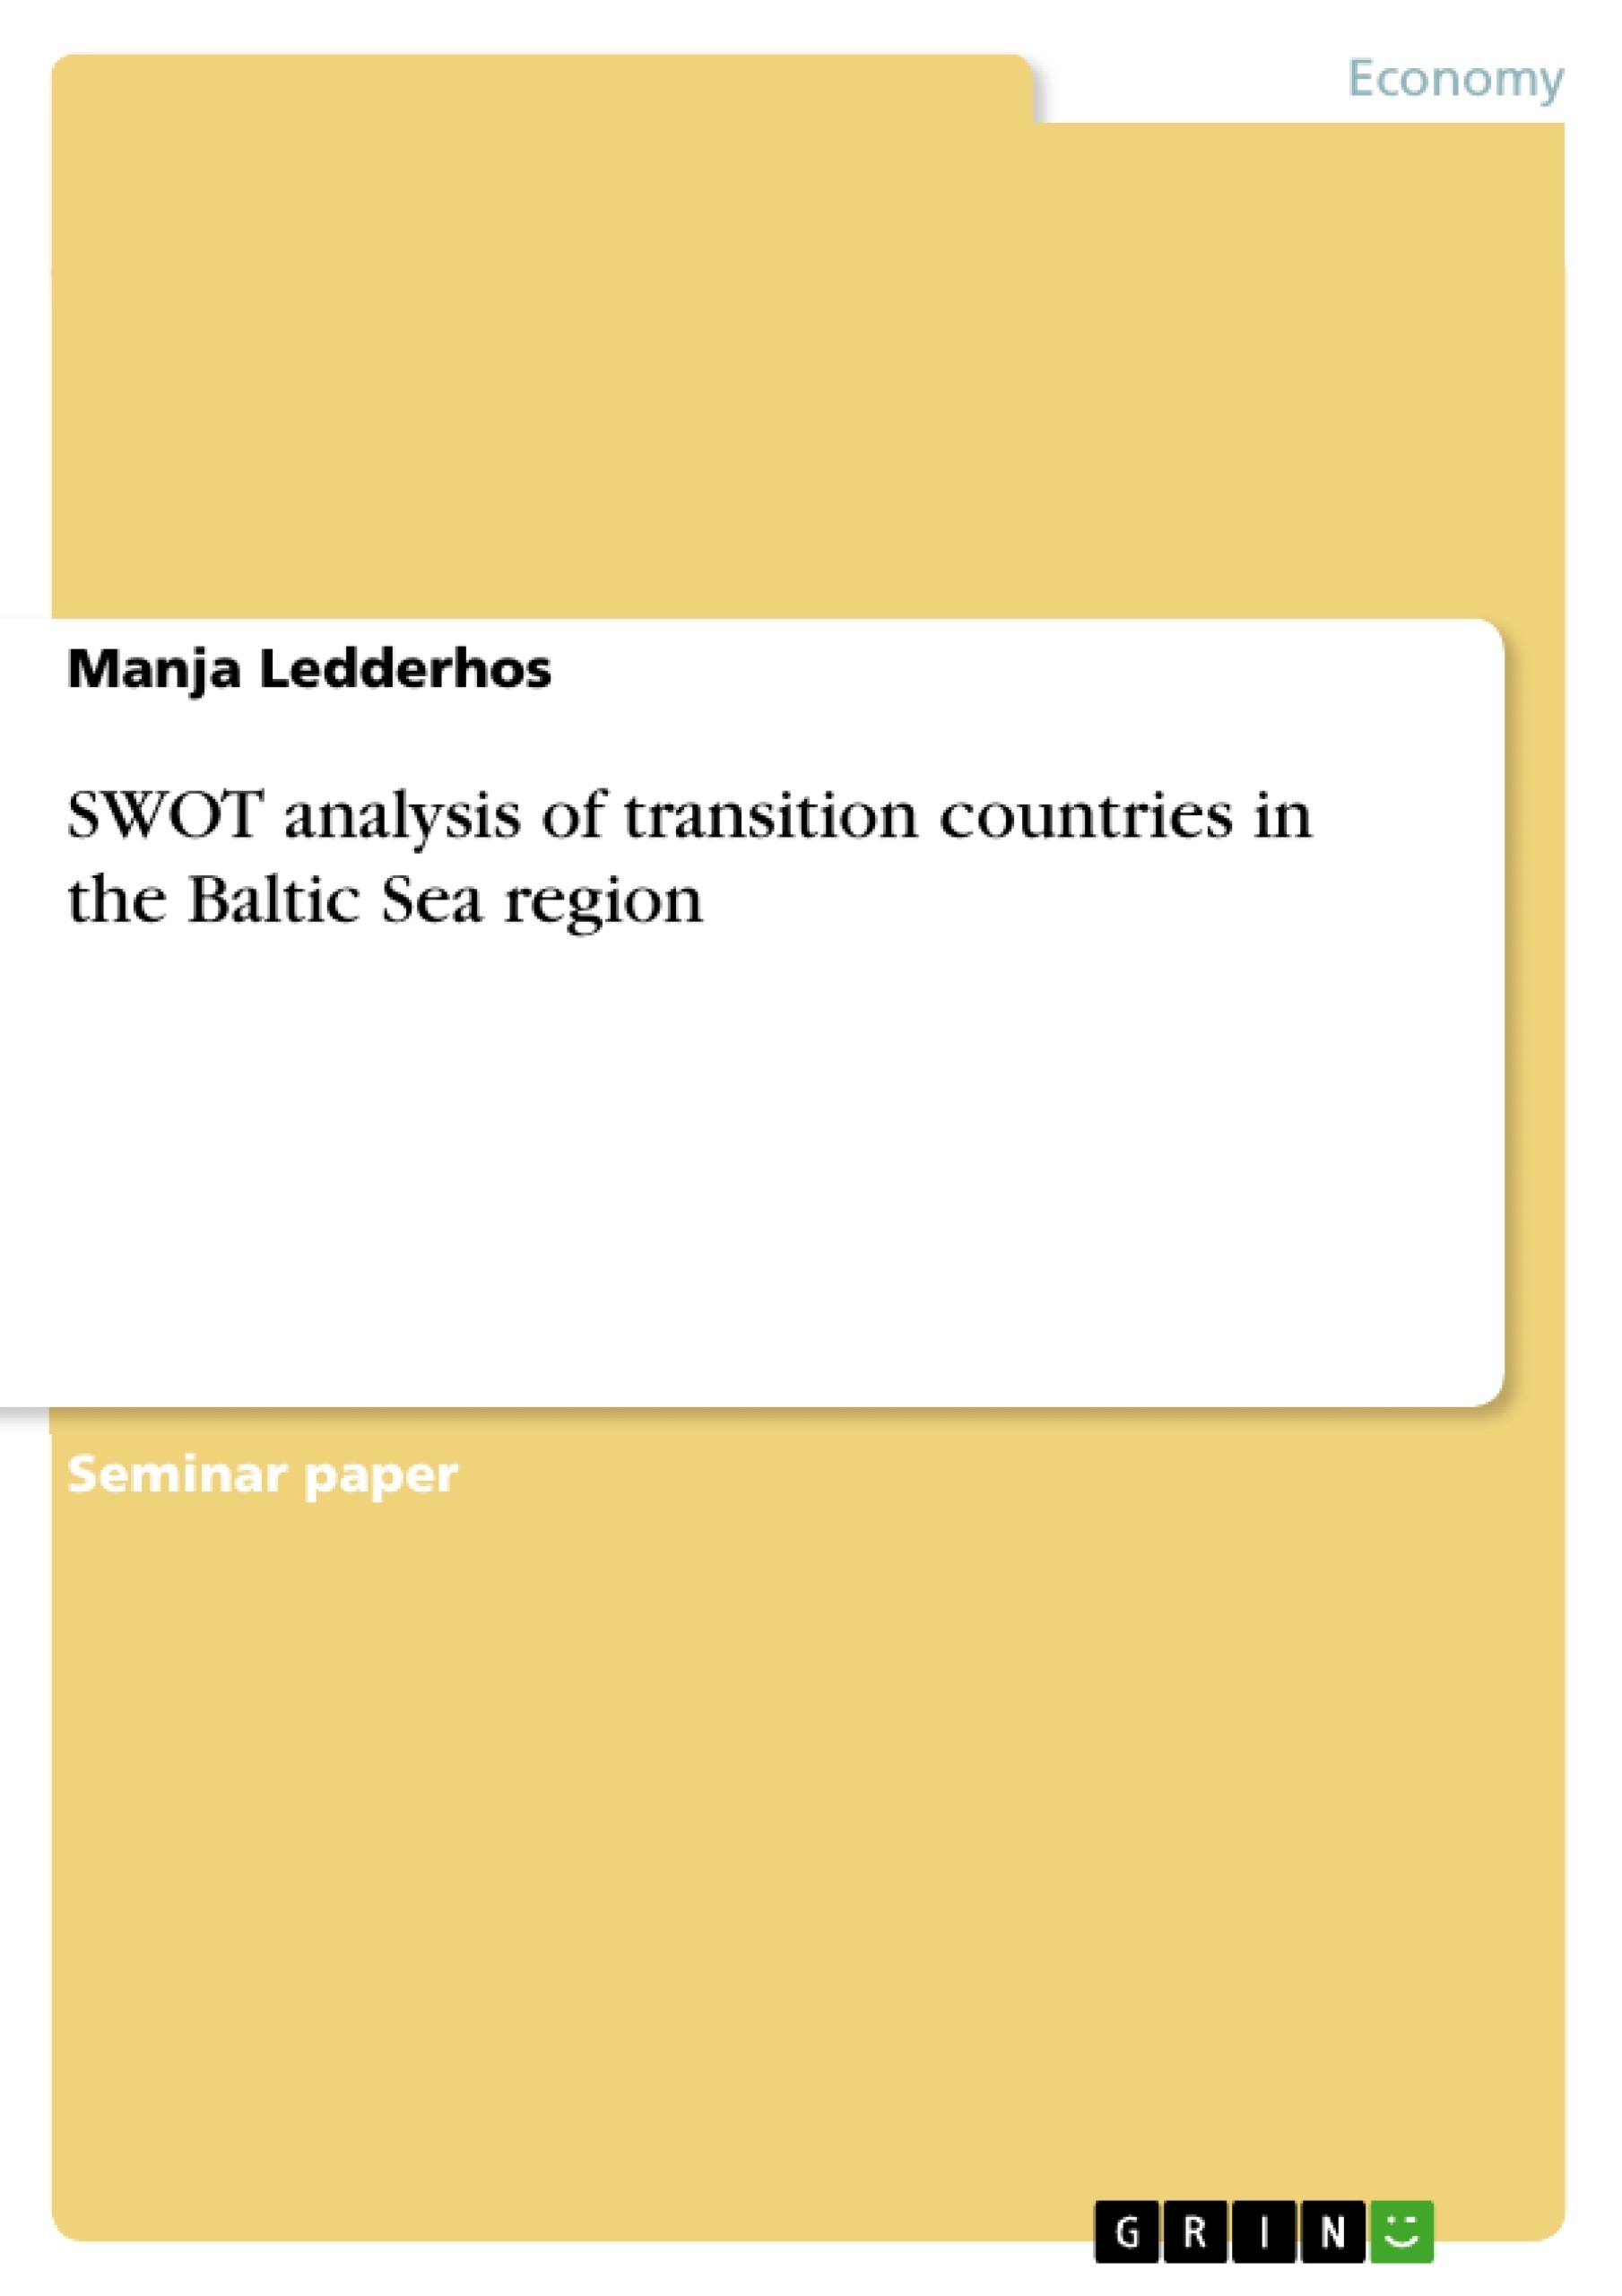 Title: SWOT analysis of transition countries in the Baltic Sea region